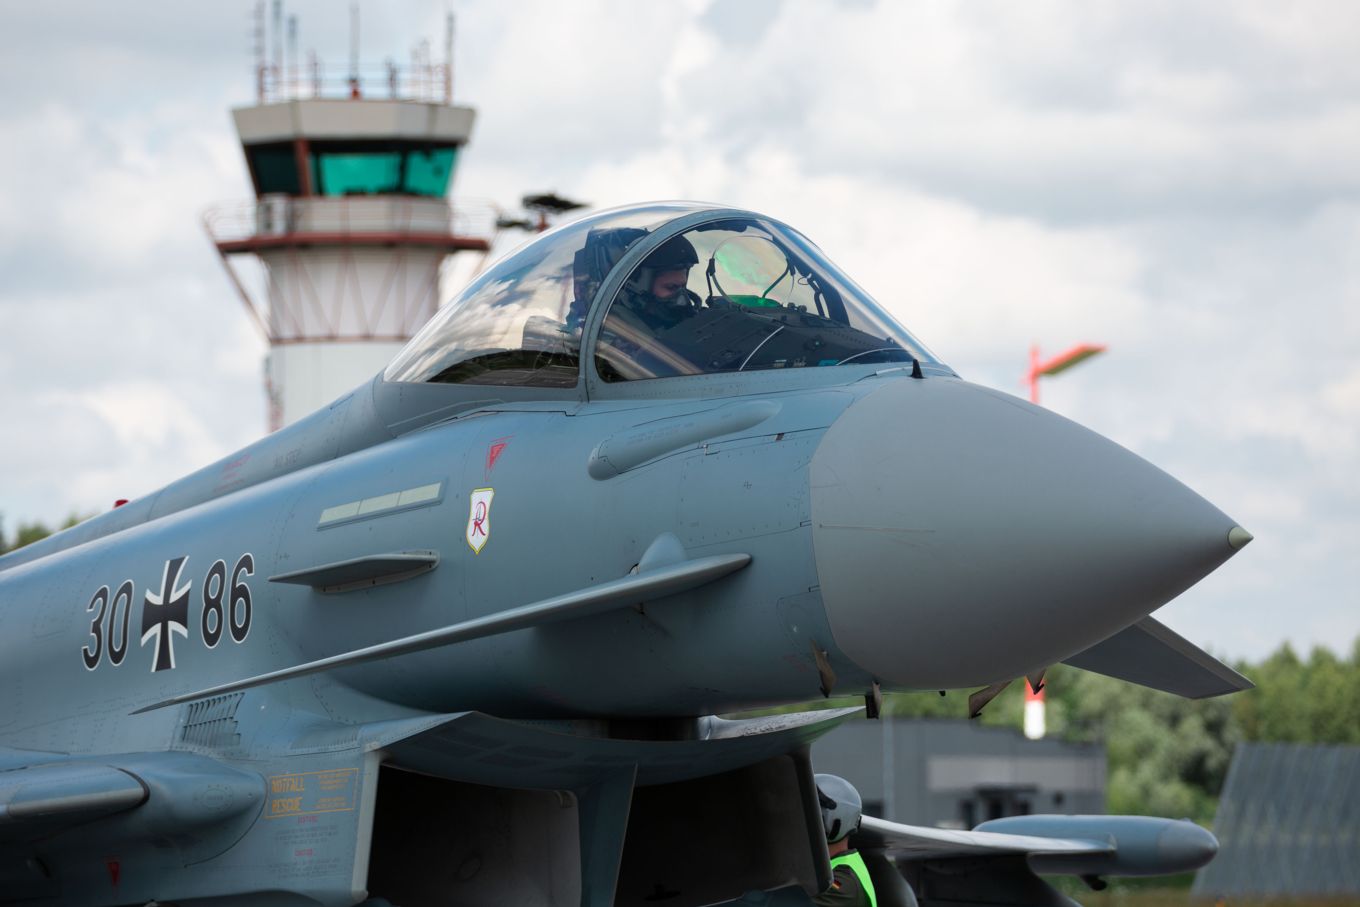 Image shows the front of German Air Force Eurofighter.